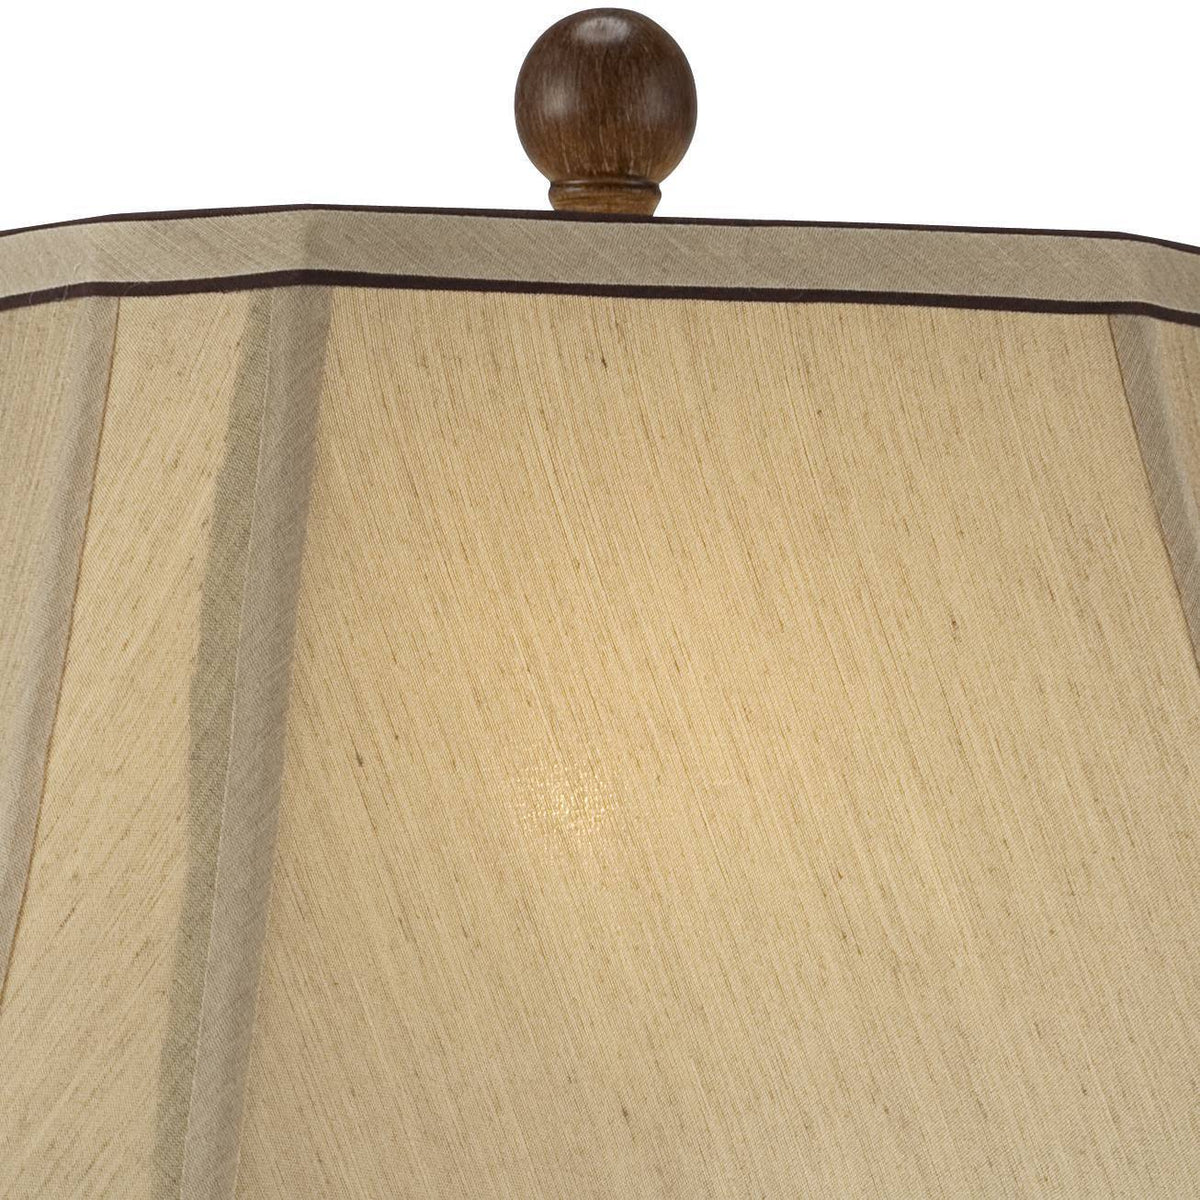 Carved Wooden Bedside Table Lamp Two-Tone Brown Rustic Wooden Desk Light